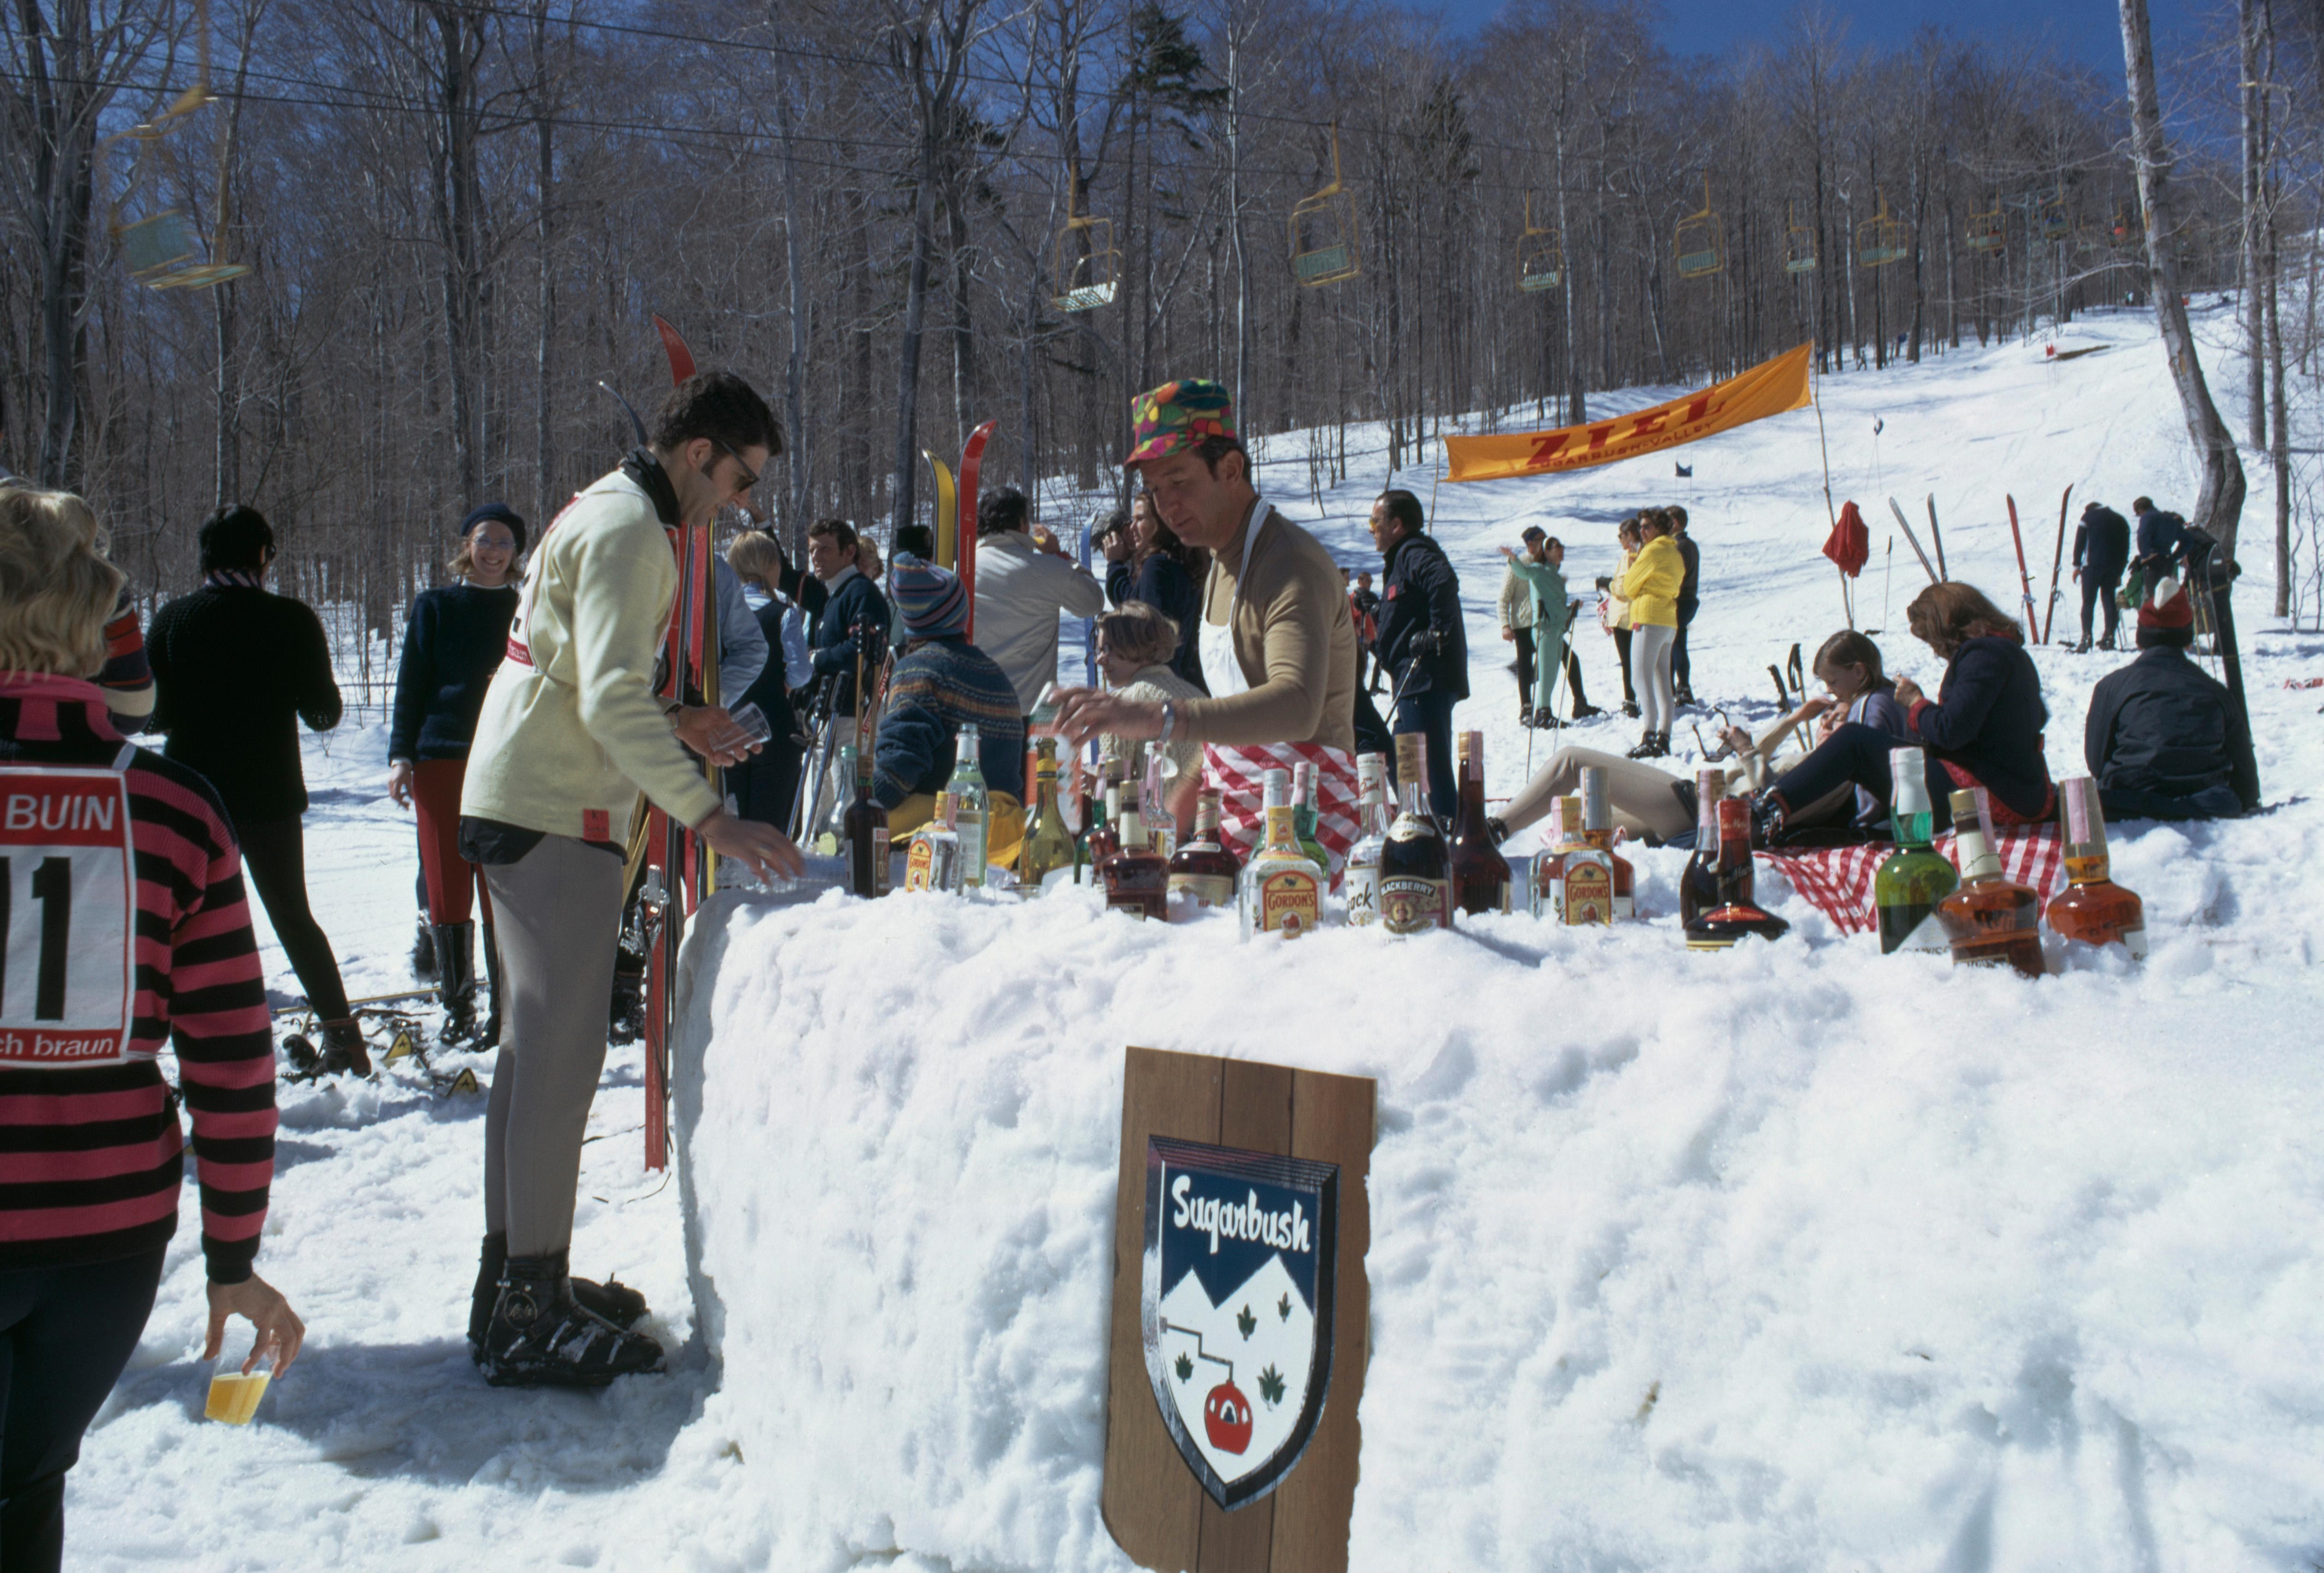 An outdoor bar at Sugarbush, a mountain resort in Vermont, March 1969. (Photo by Slim Aarons/Hulton Archive/Getty Images)

C-type print from the original transparency held at the Getty Images Archive, London. Numbered and stamped by The Slim Aarons